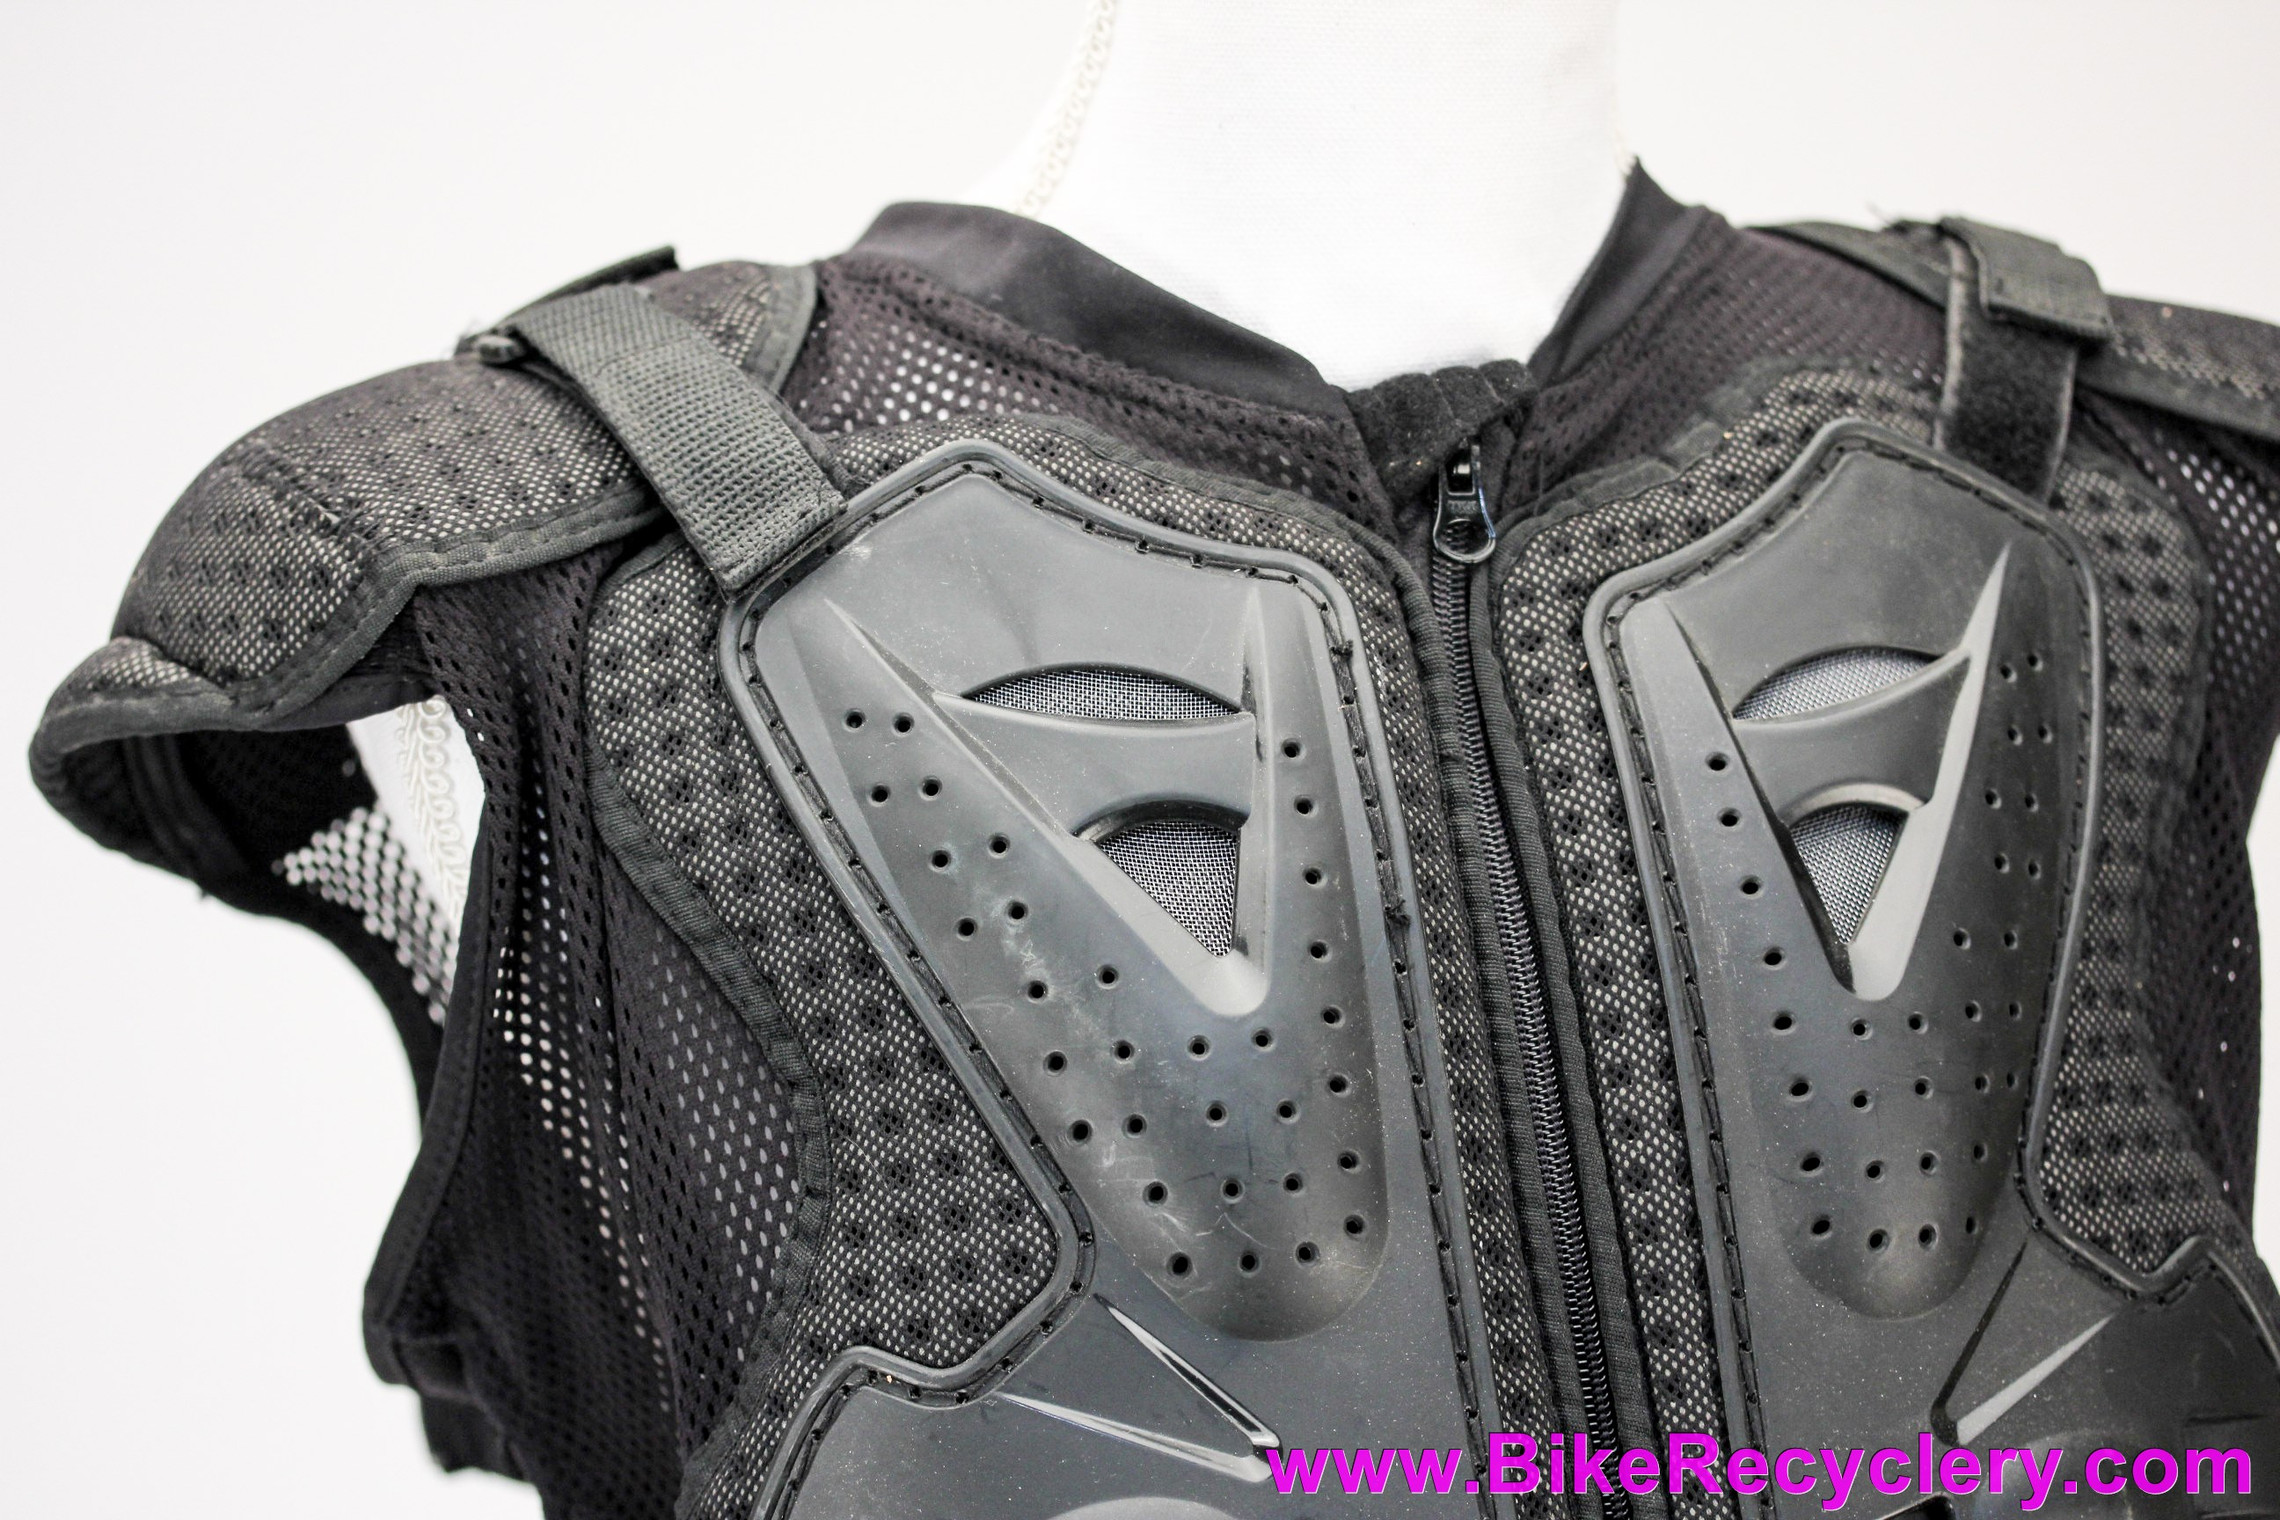 Fox Racing Titan Sleeveless Chest Protector Jacket: Large Removable Back  Protection MTB MX Bike Recyclery